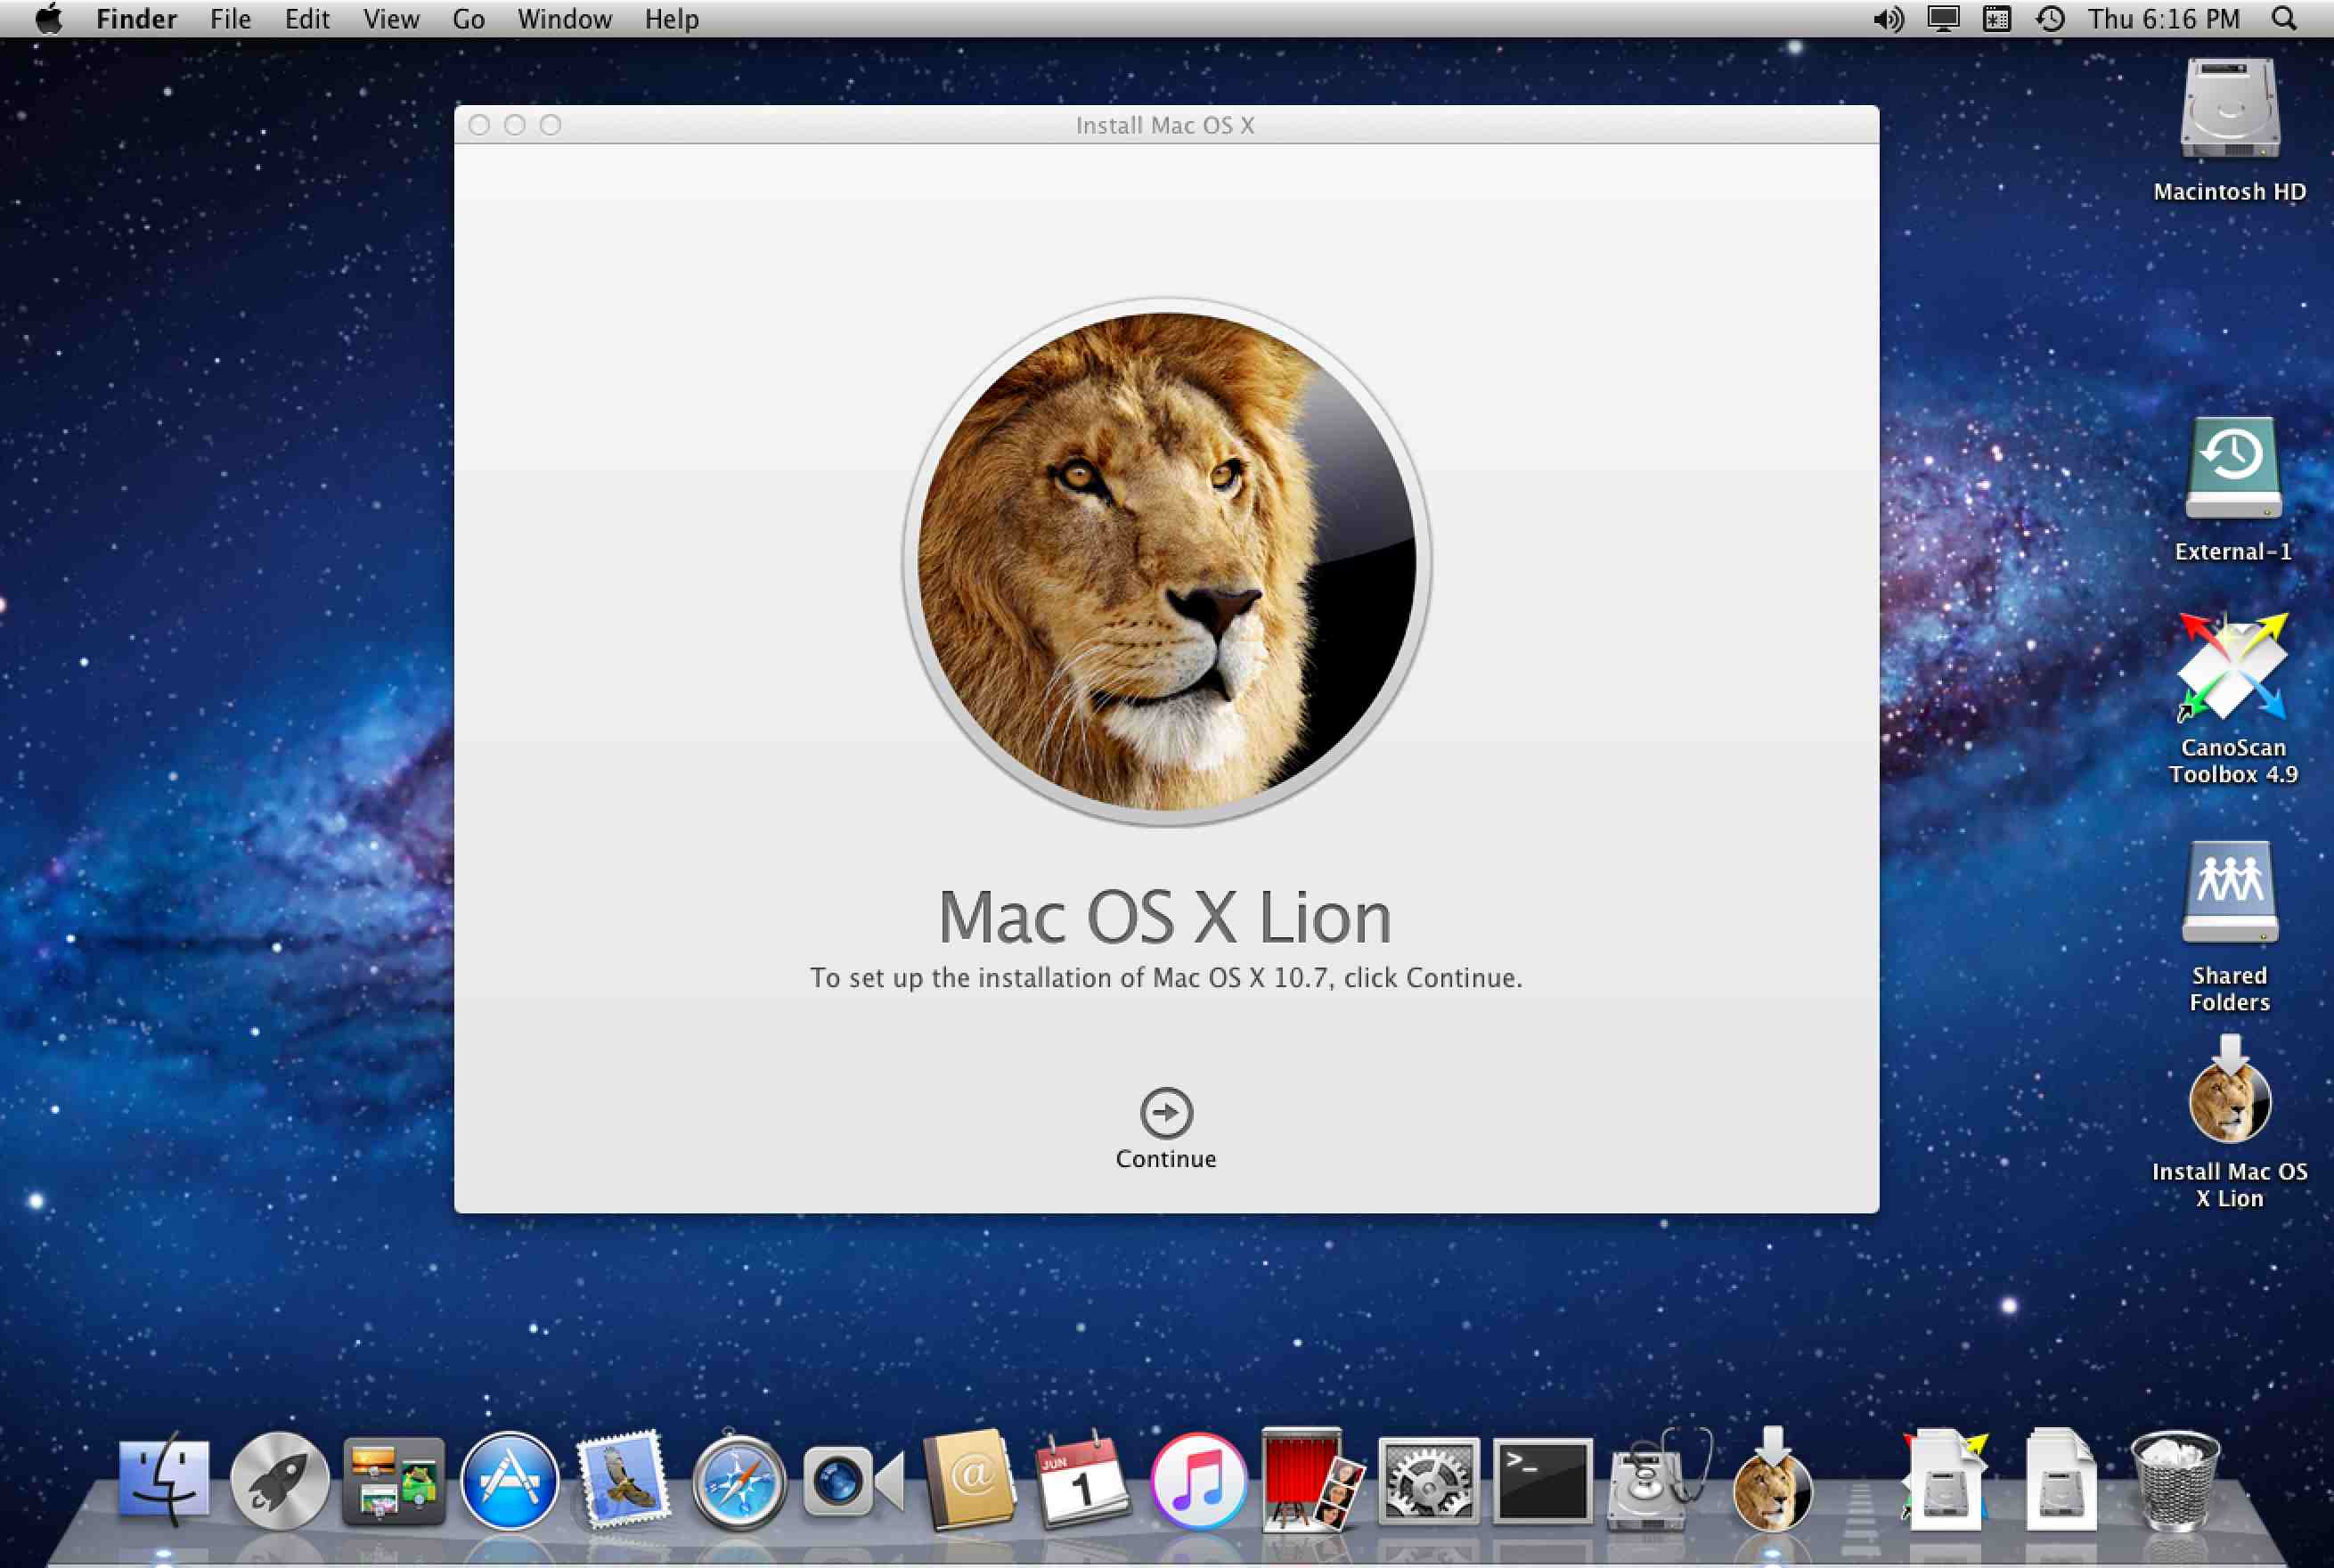 os x lion software download